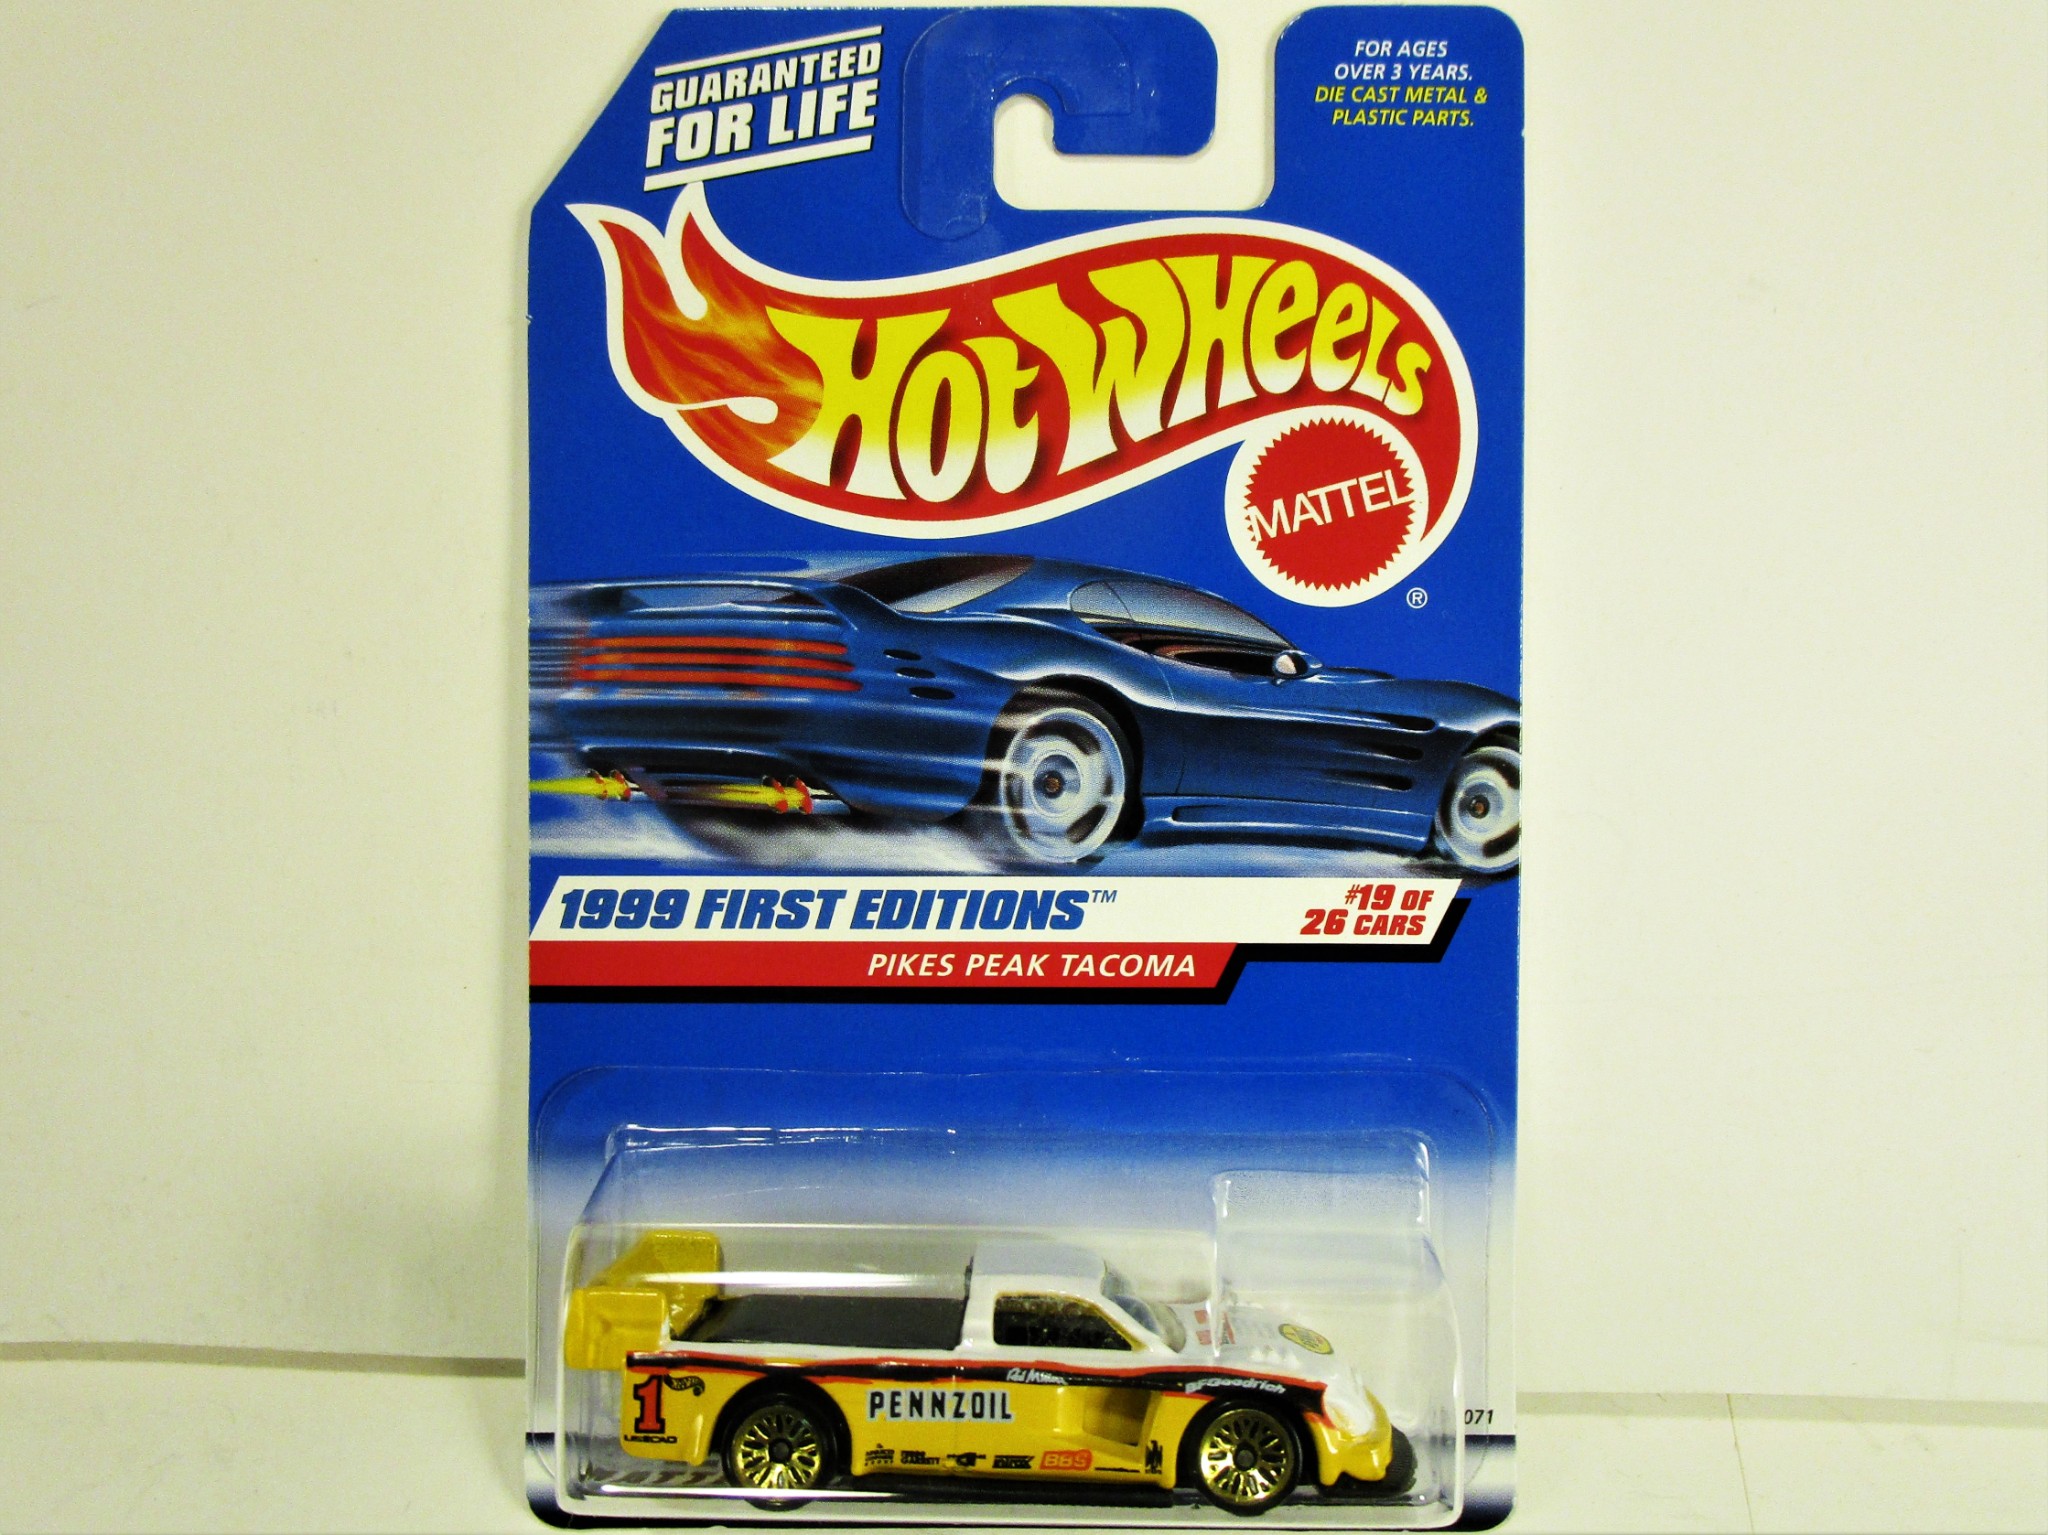 1999 FIRST EDITIONS PENNZOIL PIKES PEAK toyota tacoma hot wheel. 